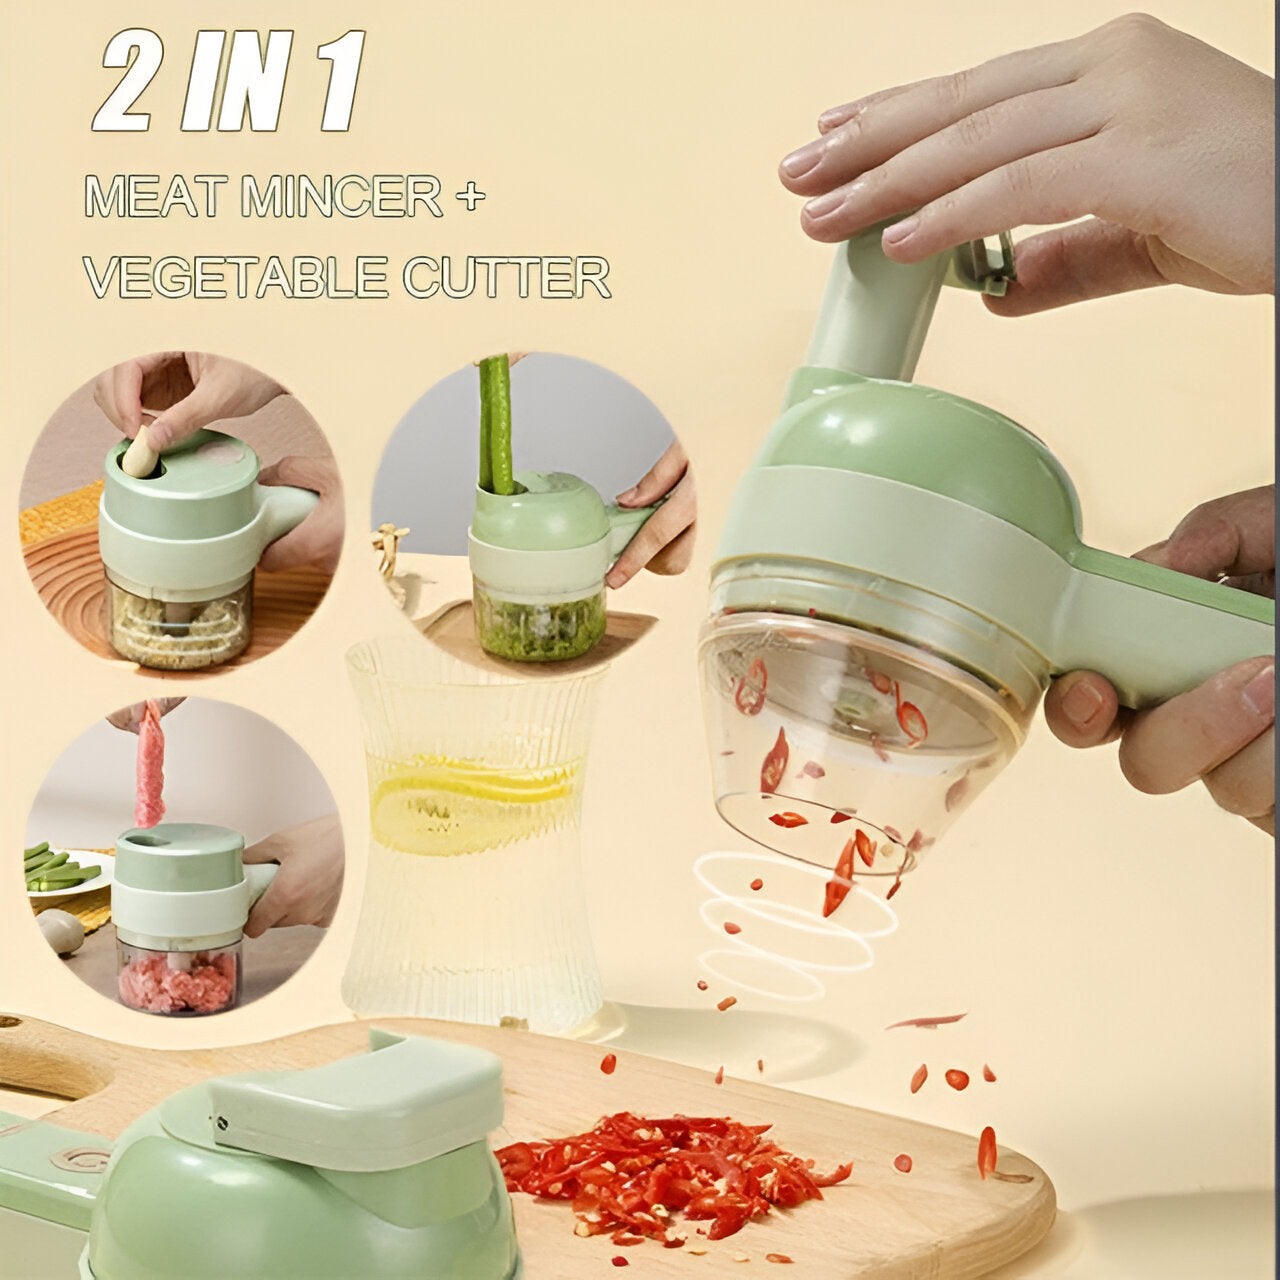 4 In 1 Handheld Electric Vegetable Cutter Wireless Chop Garlic Mash Minced Slice Onion Cutting Multifunctional Cooking Gadget